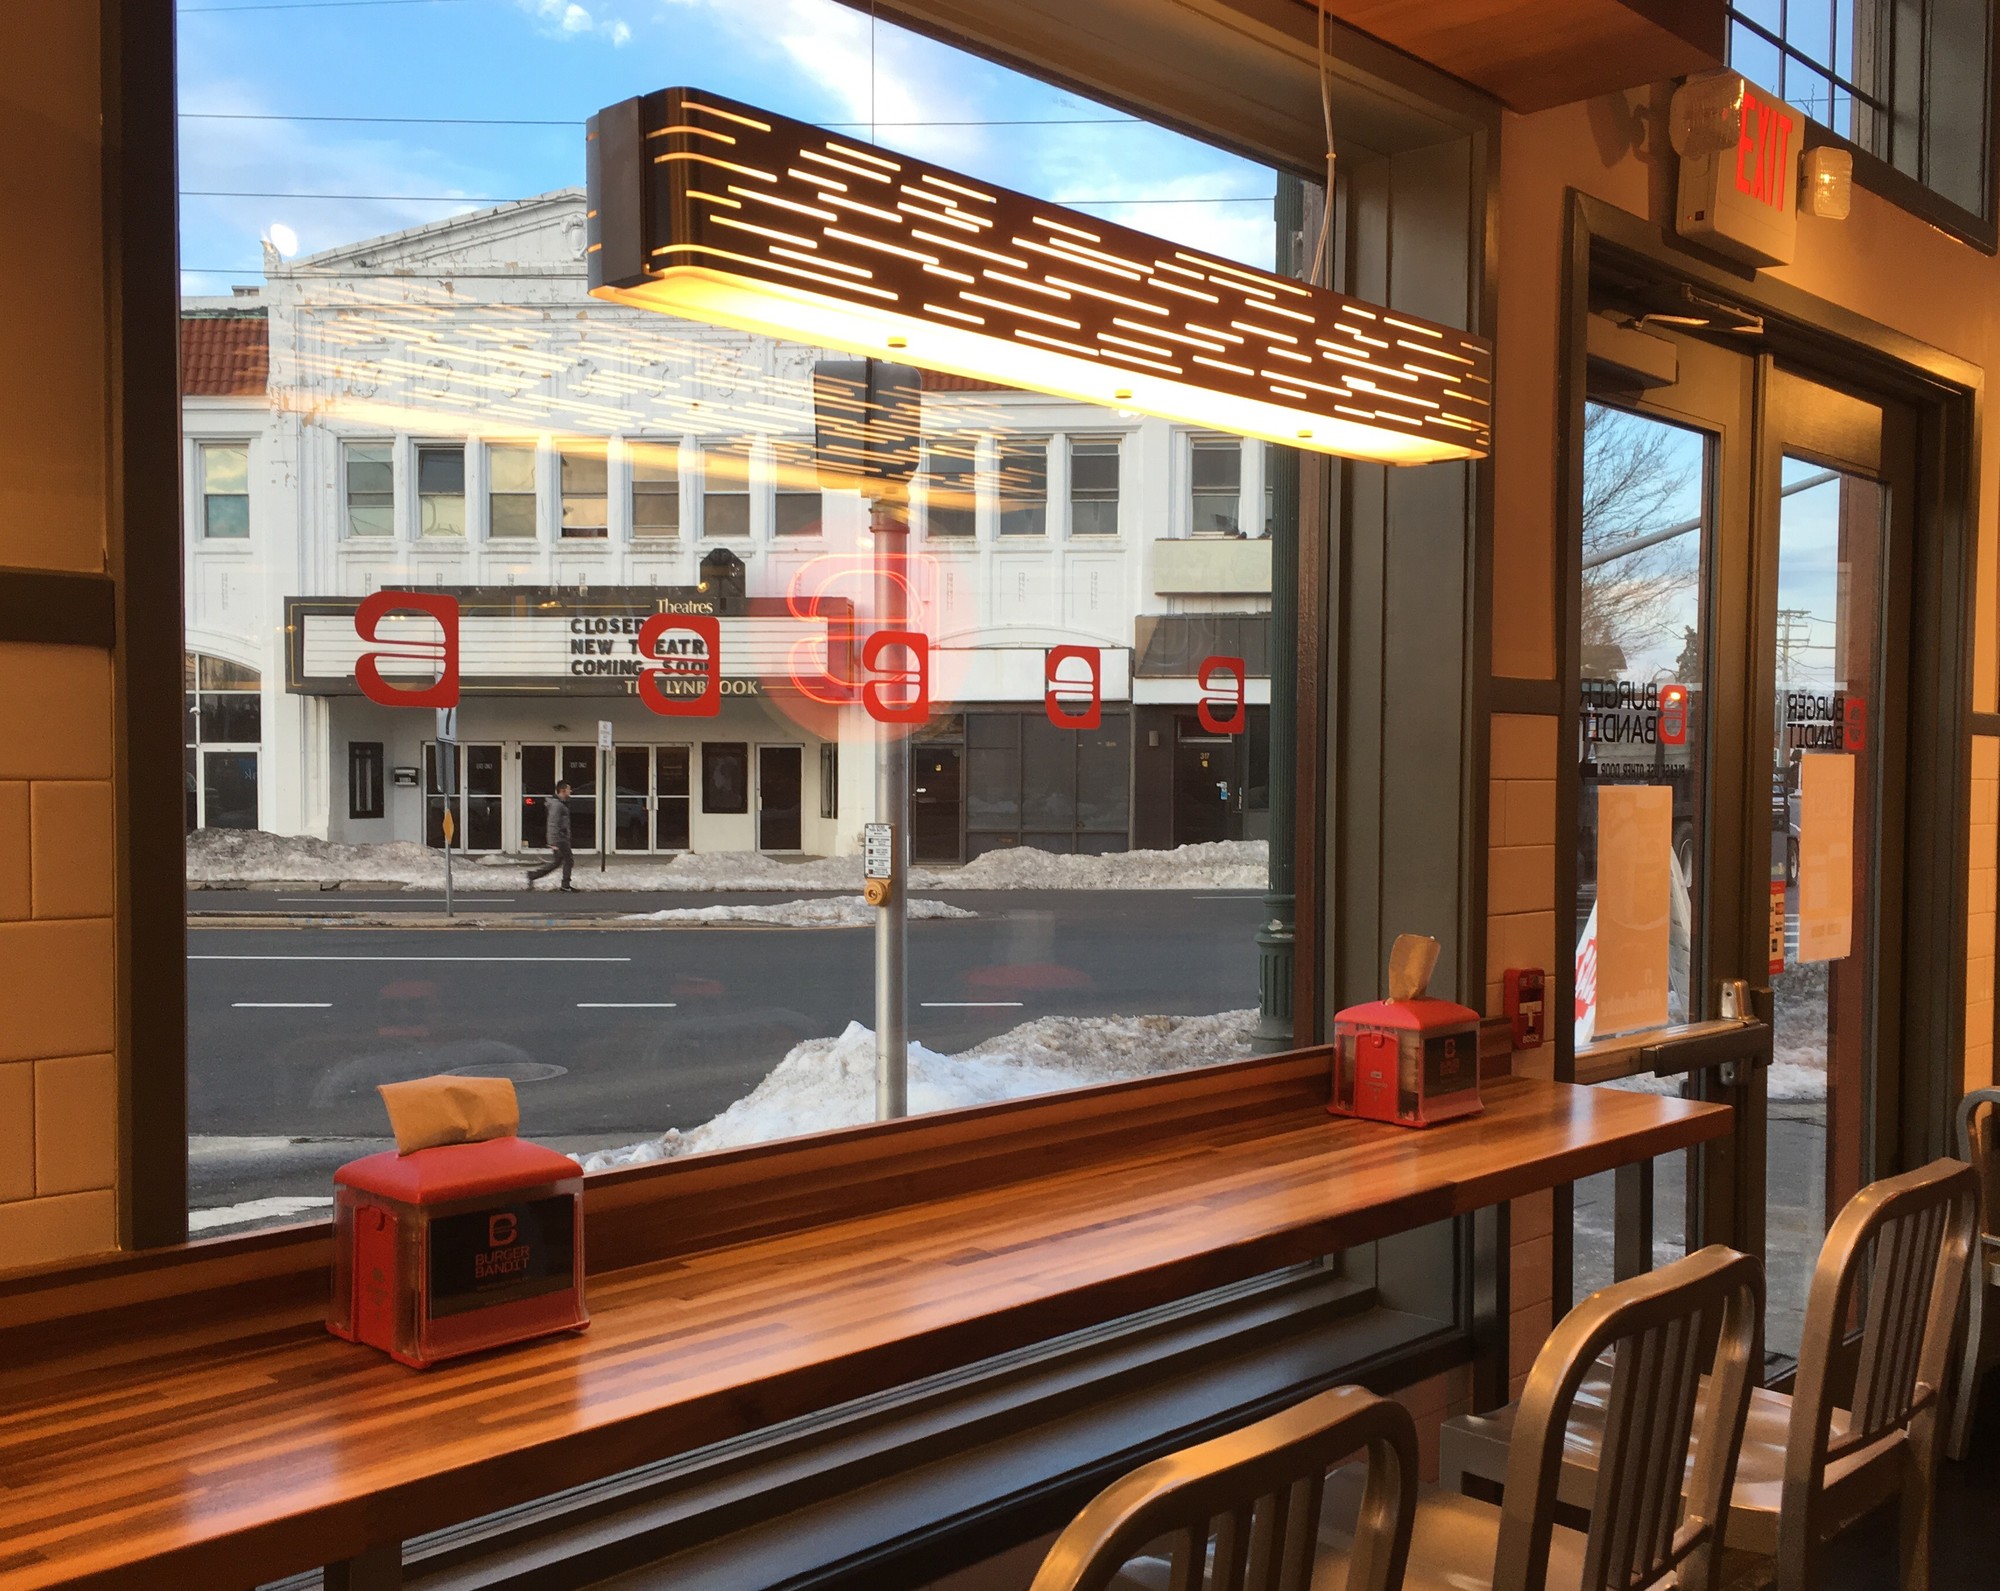 The view from inside the Burger Bandit on Broadway, across from the theater. Owner Chris Holmes said that he doesn’t think his business will be affected too much by the theater’s temporary closure.